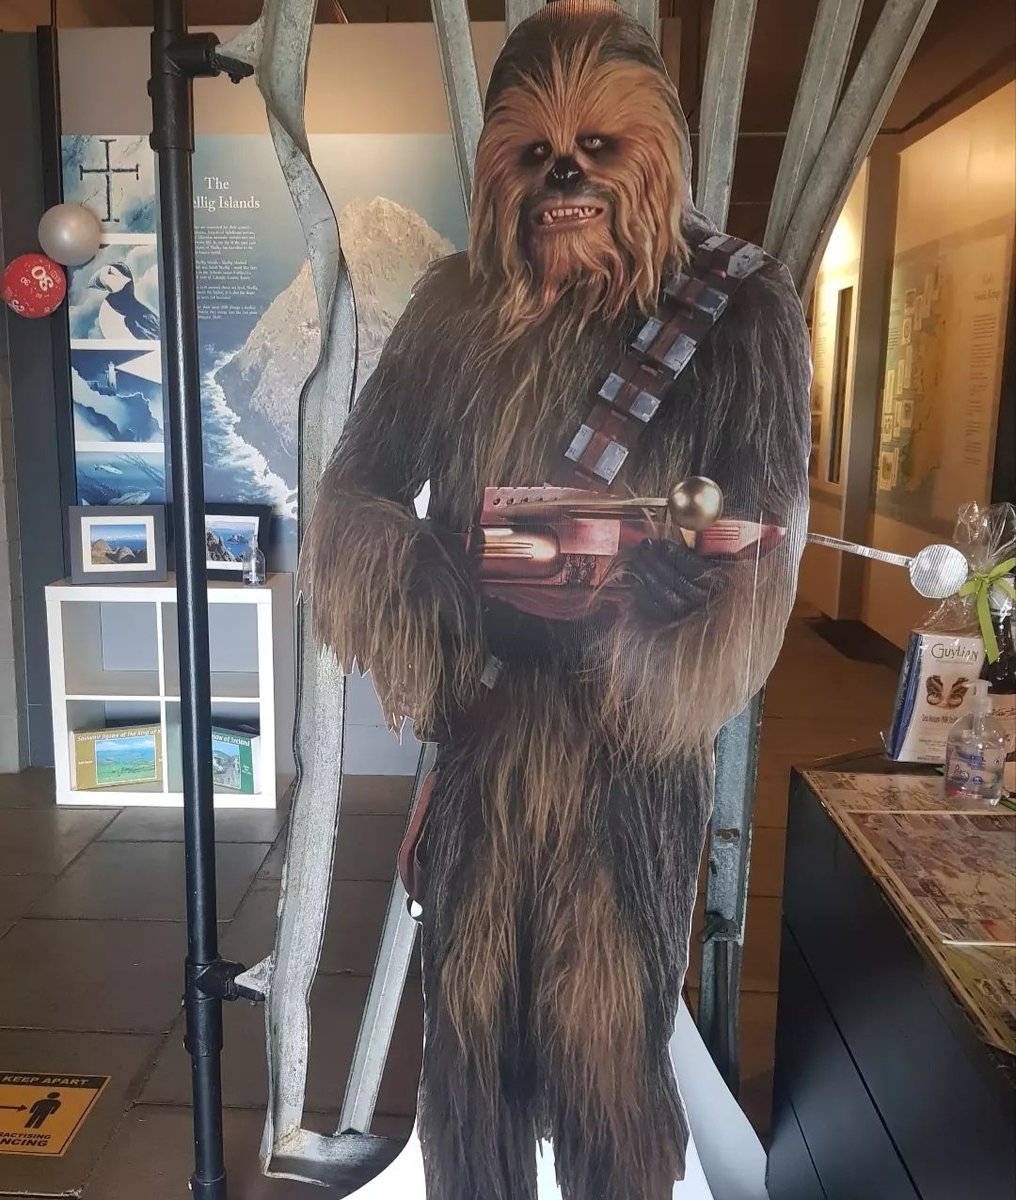 The May the 4th Festival returns tomorrow with the #starwarstreasuretrail. Come in and take a snap with #chewie. Don't forget to tag us to be in with a chance to win some fantastic prizes!

#skelligexperience #starwars #maythe4thbewithyou #theforceisstrong #valentiaisland